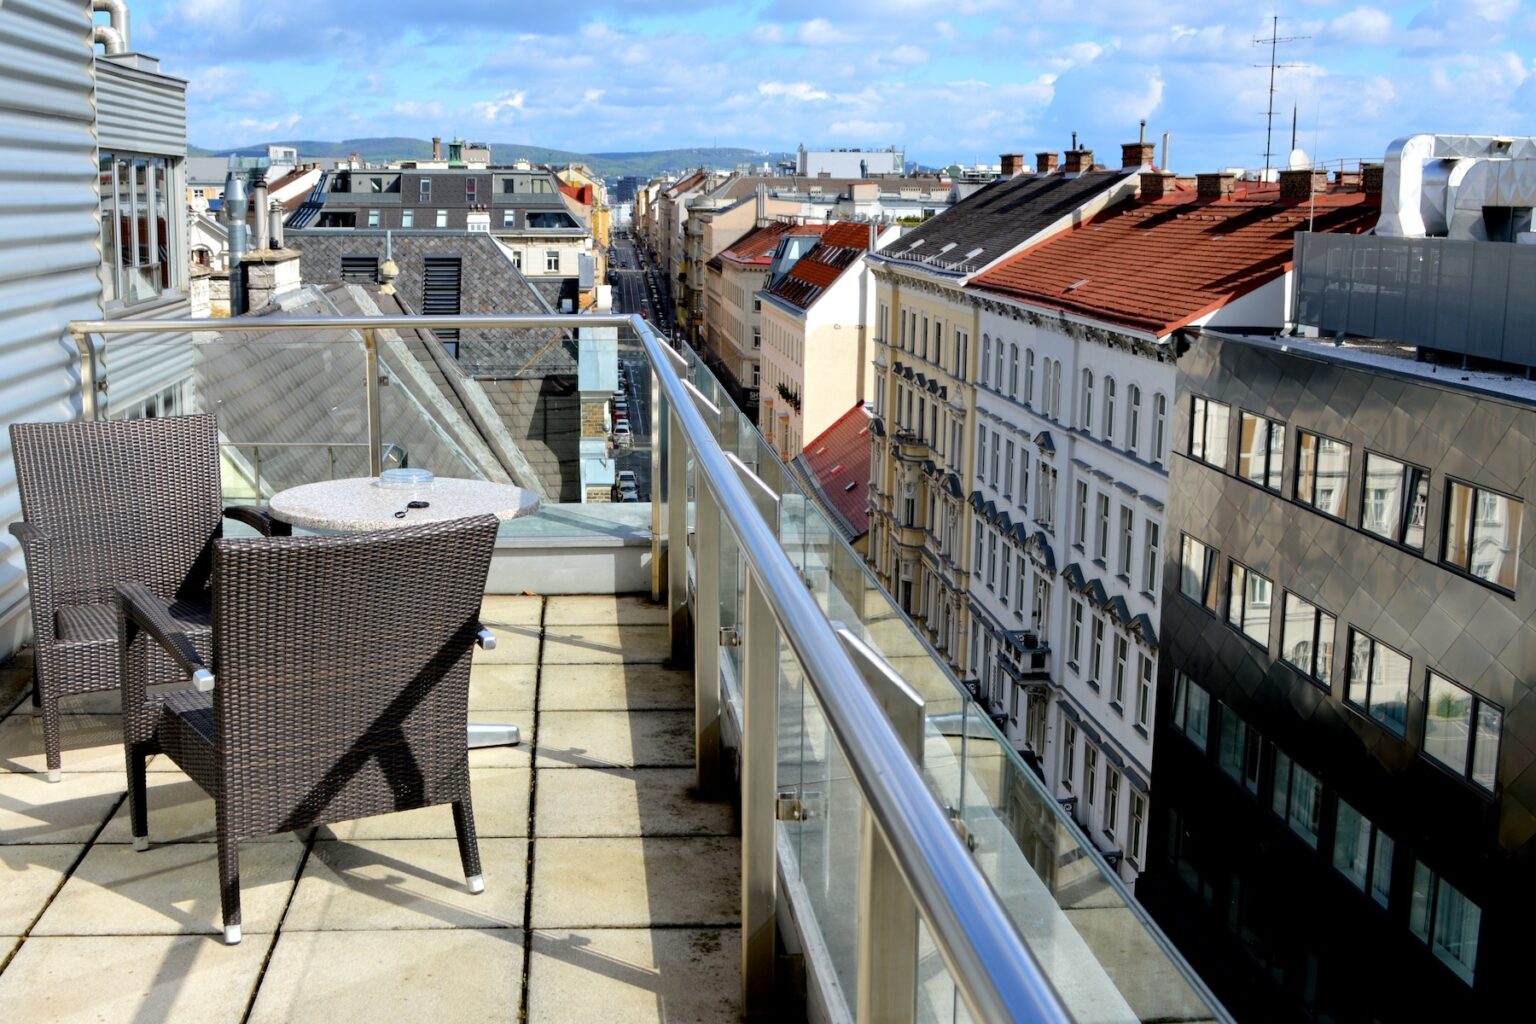 Rooftops of Vienna buildings shown from the balcony of an apartment